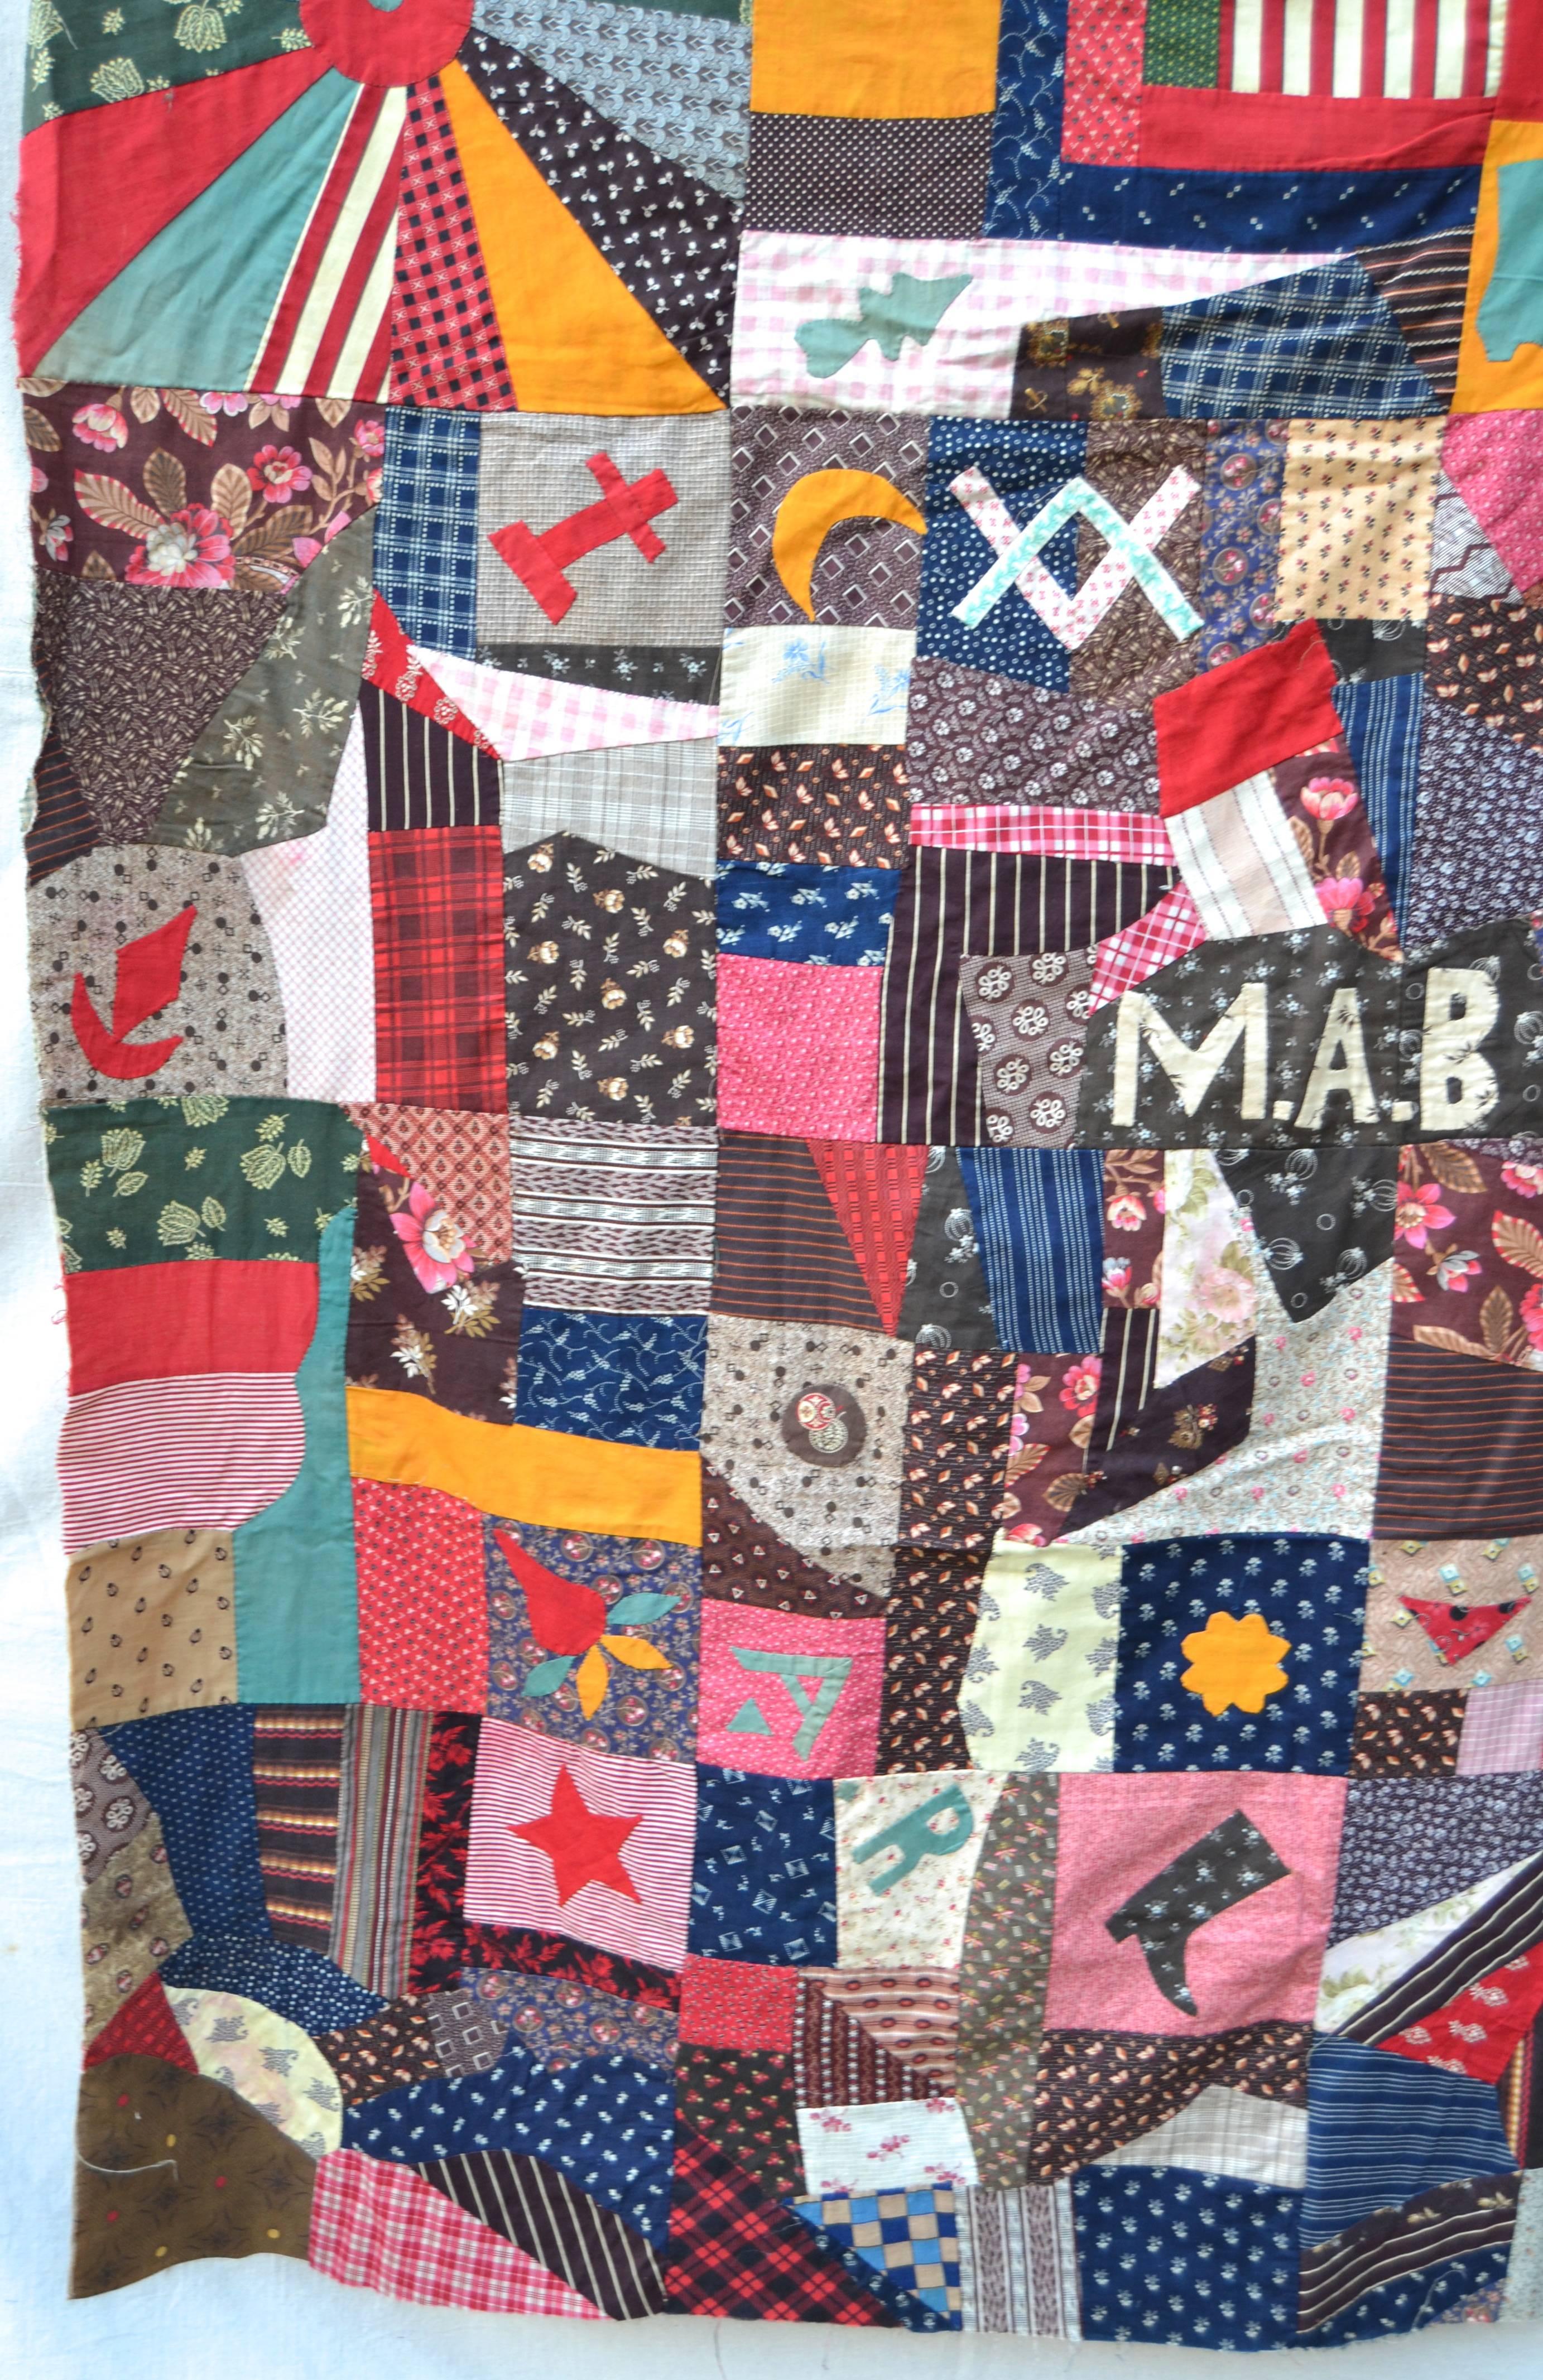 Extraordinary quilt-top with bright and graphic applique images of a hand, hearts, stars, trees of life, boots, flags and abstract patterns. In the centre on a bright red ground are the initials H&M and the date of 1888. There are also broderie